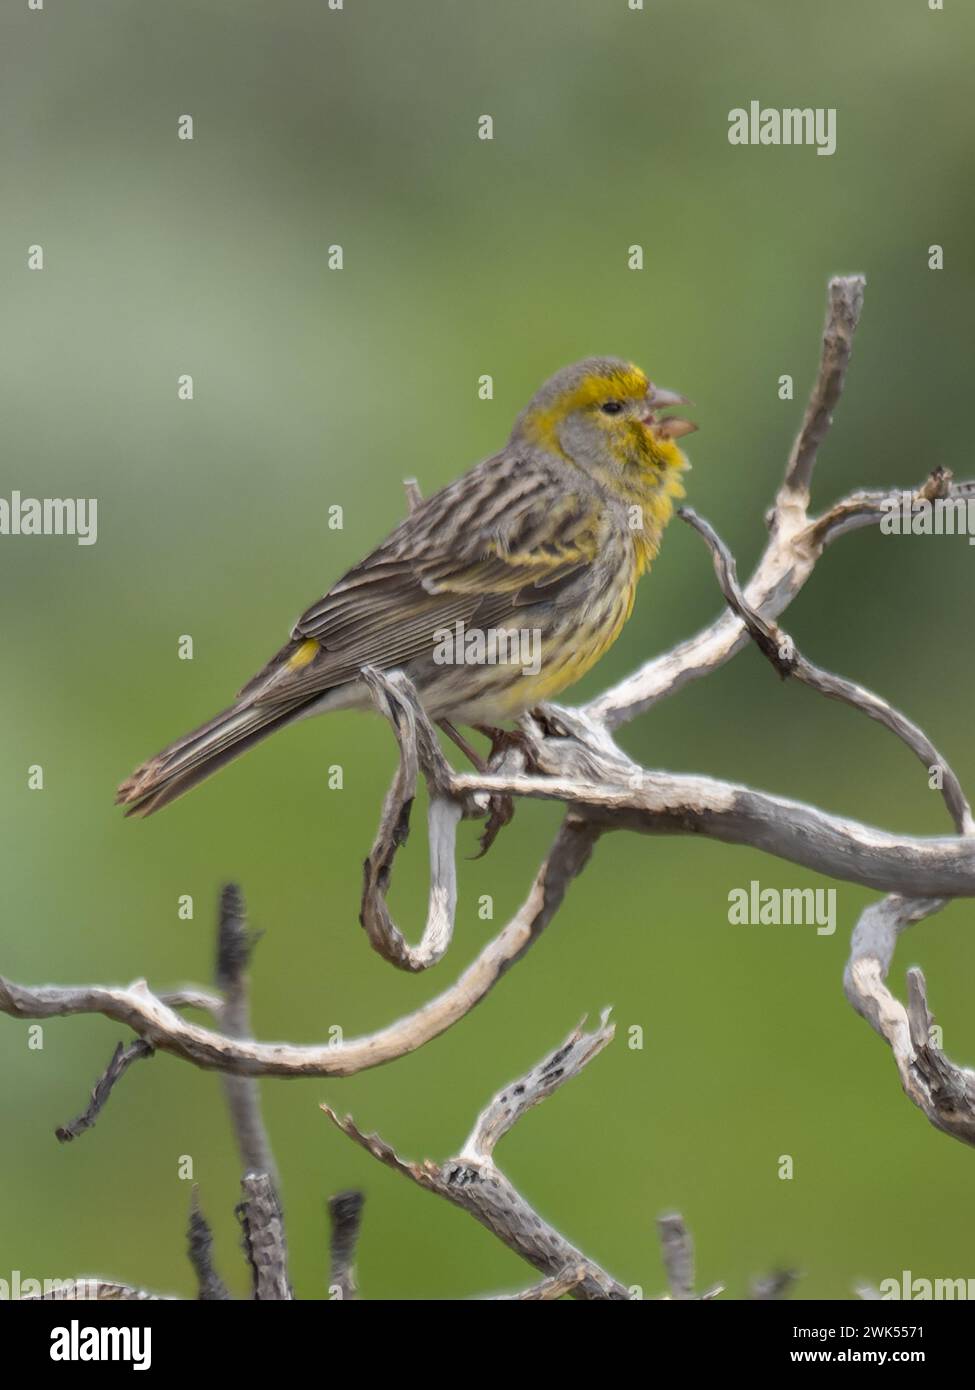 Atlantic canary, Serinus canaria, also known as the wild canary, island canary, common canary, or just canary Stock Photo